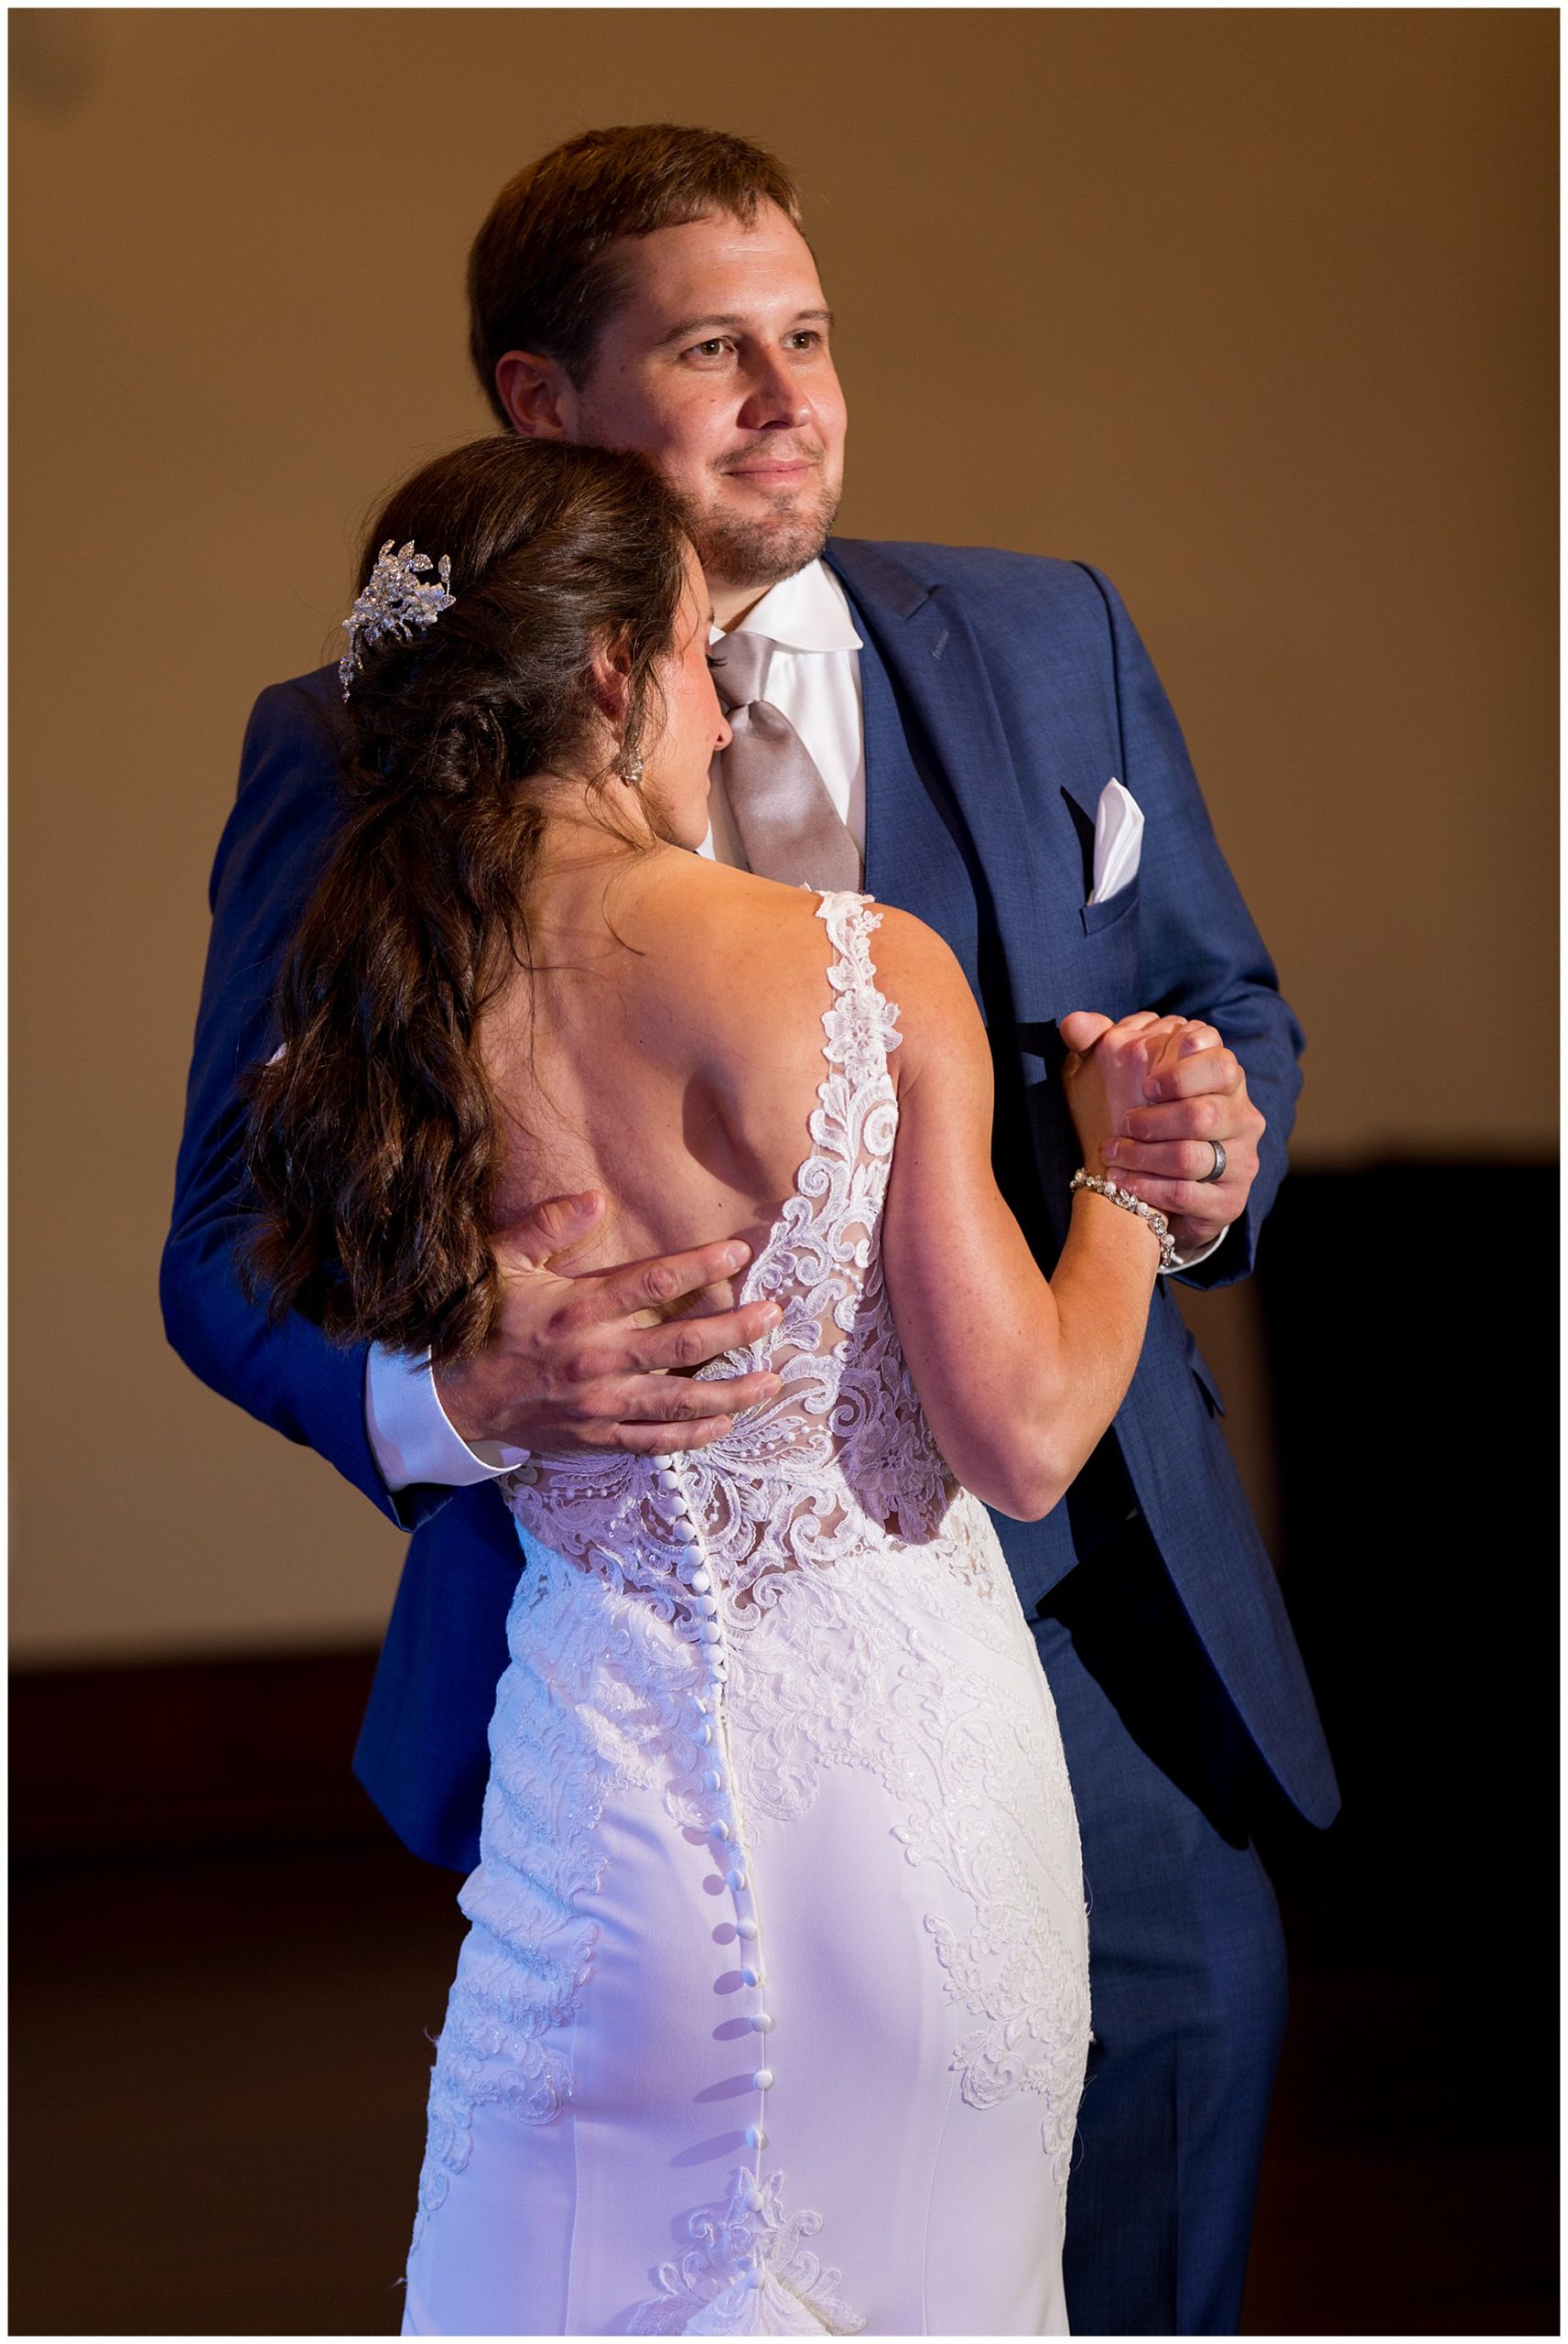 bride and groom first dance in Parkview Ballroom at Eagles Theatre wedding reception